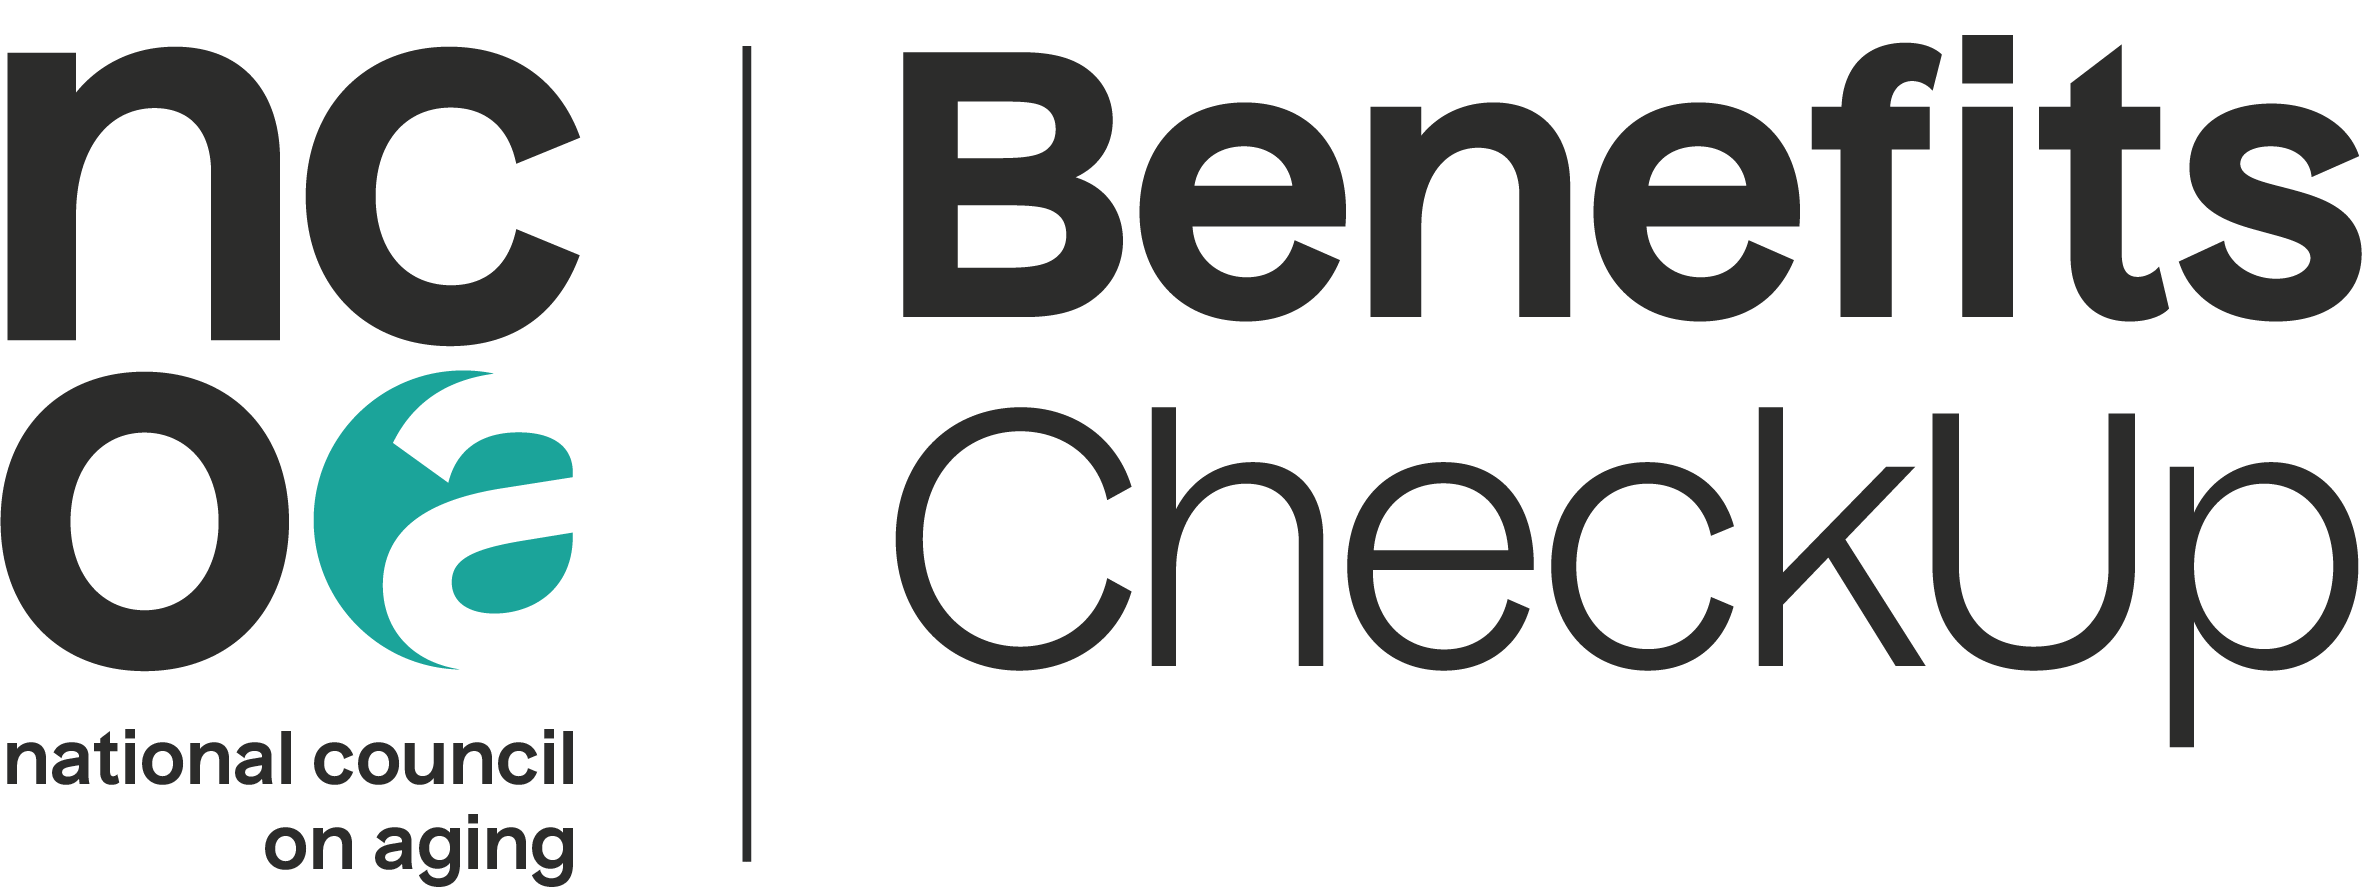 BenefitsCheckUp® is a free online tool that connects millions of older adults with benefits that can help pay for healthcare, prescriptions, food, energy assistance, and more.